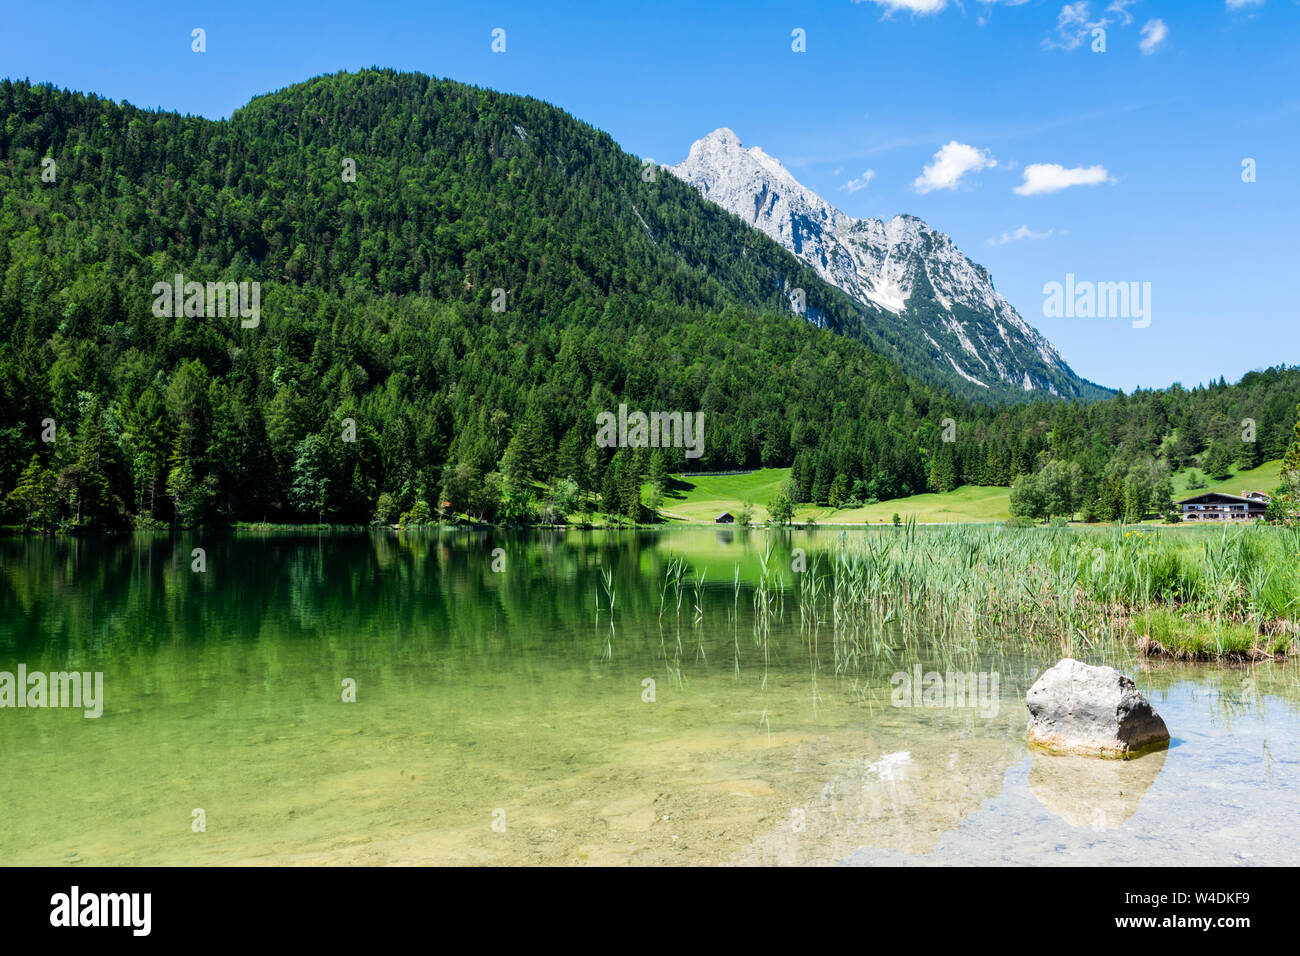 The idyllic lake Lautersee in the Karwendel Mountains of the Bavarian alps. Stock Photo